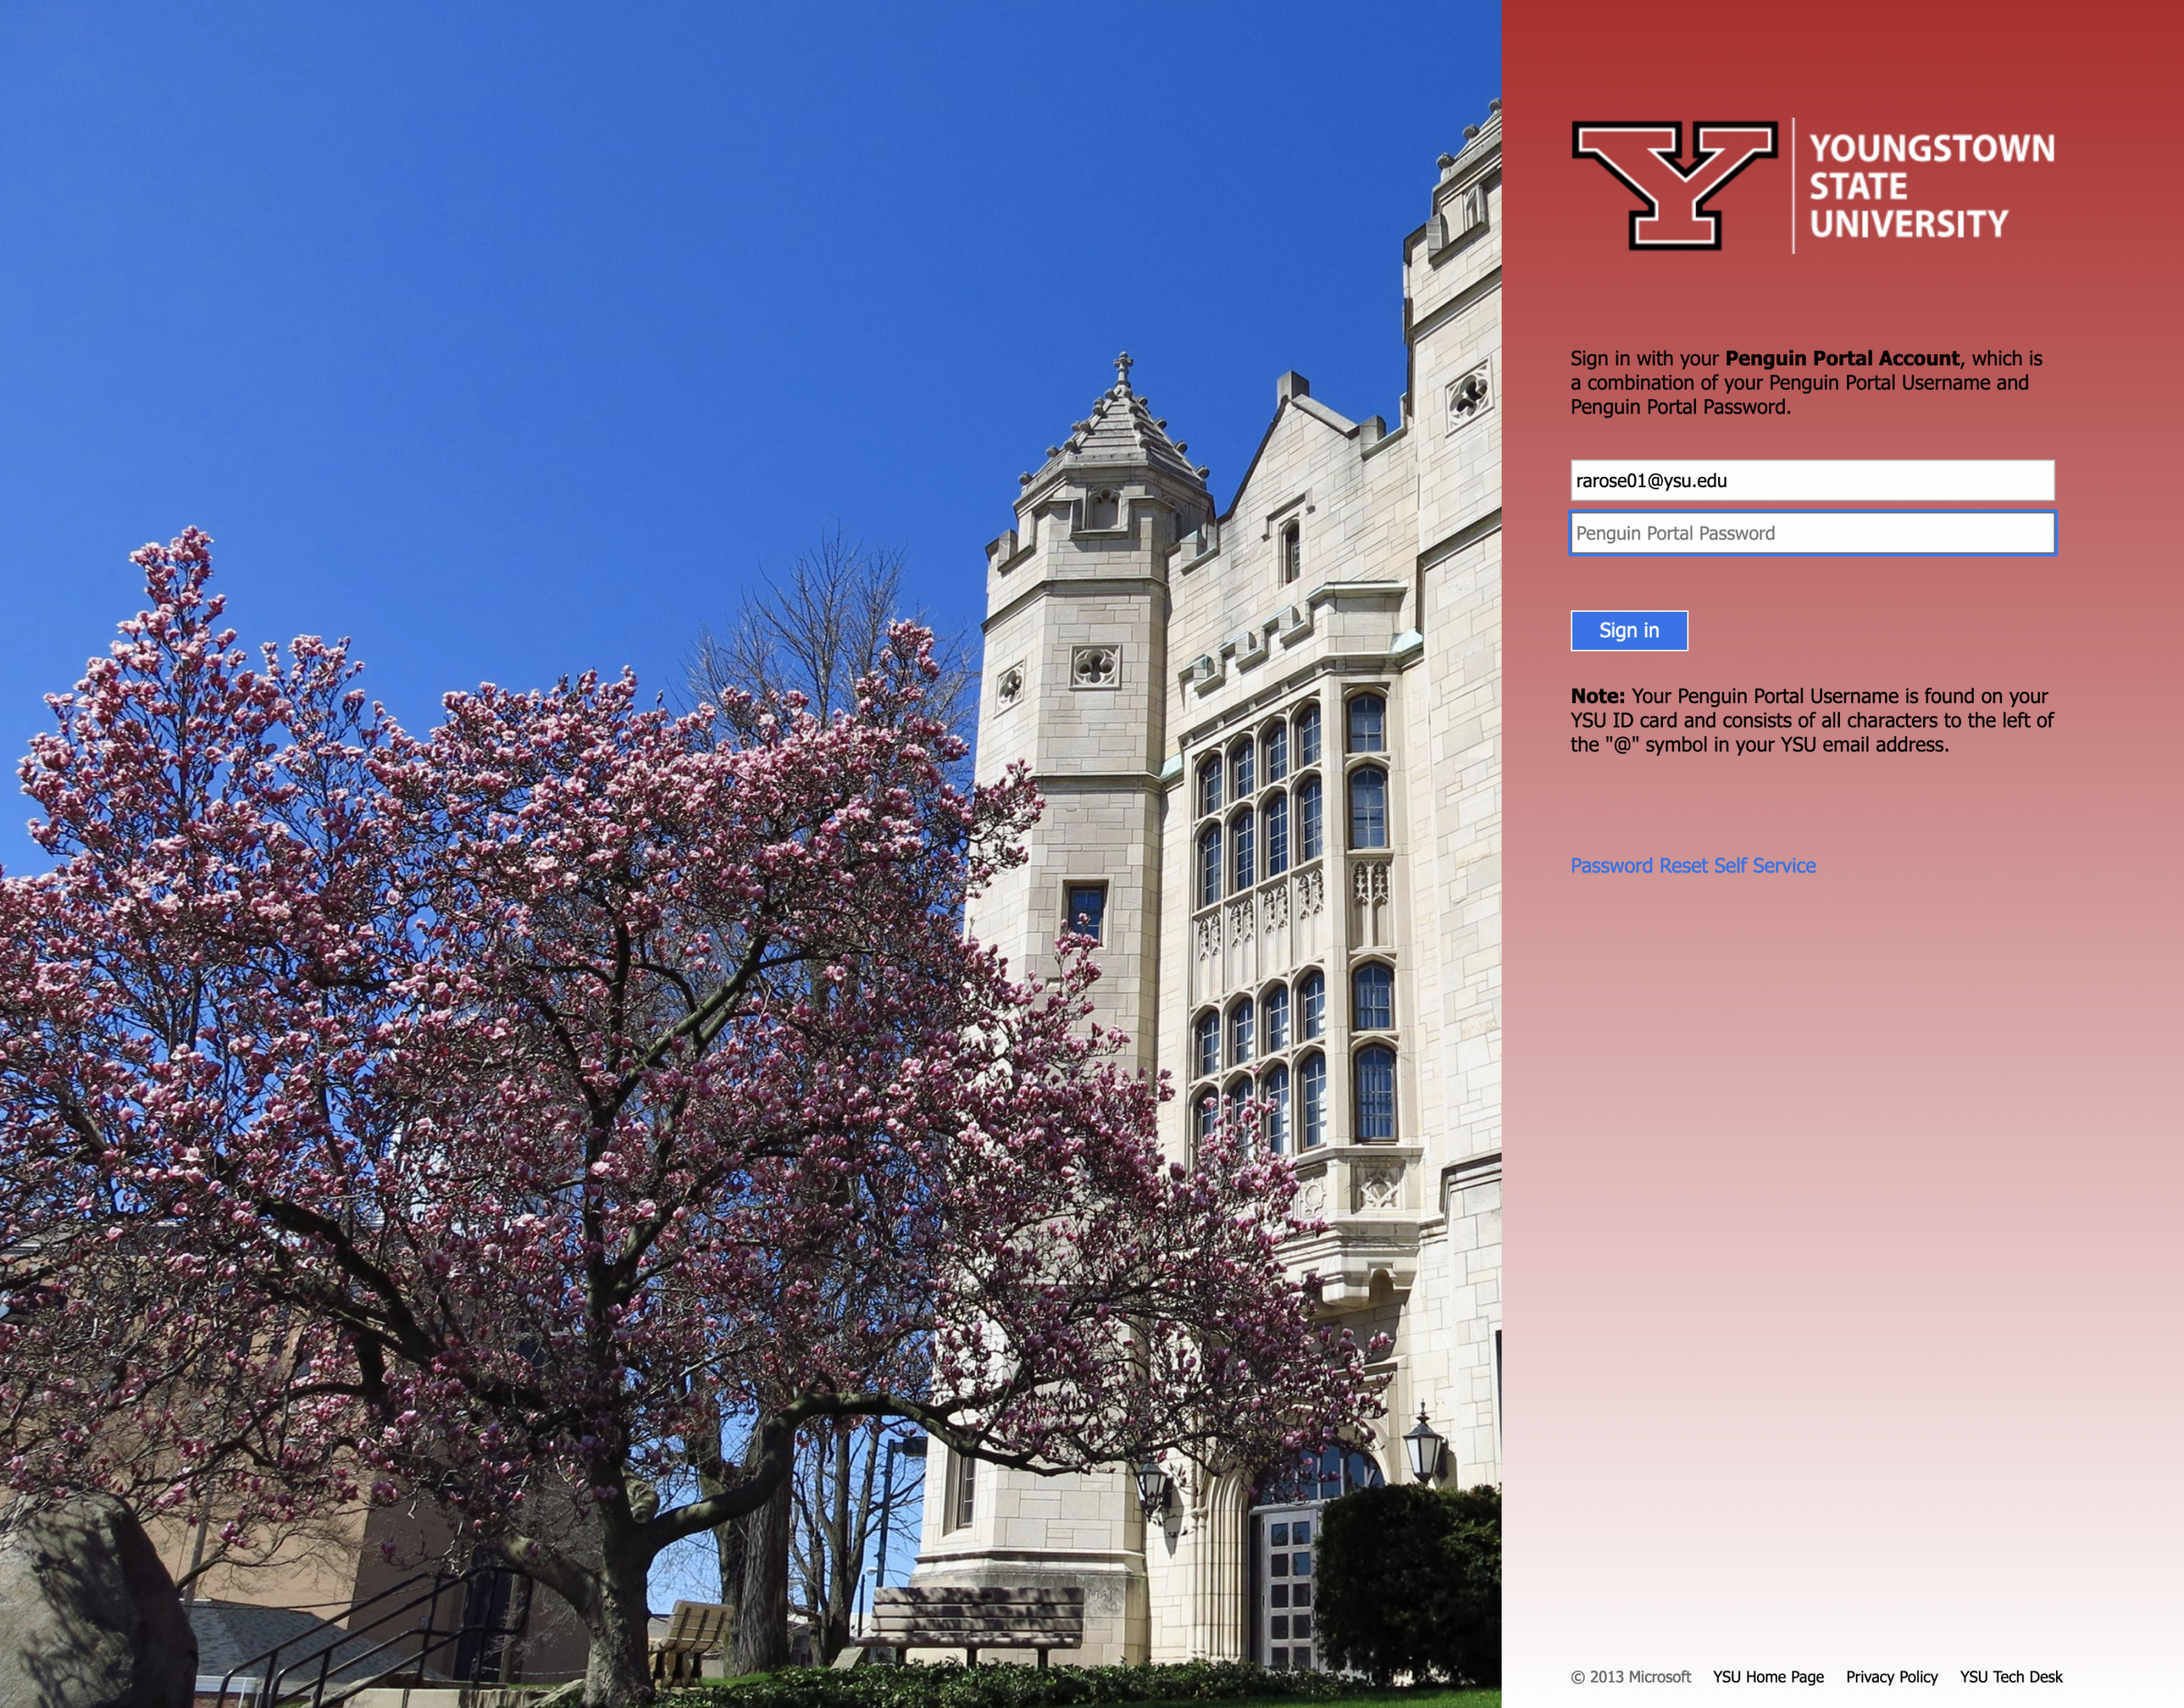 You will be re-directed to sign in with your YSU username and password. Sign in.